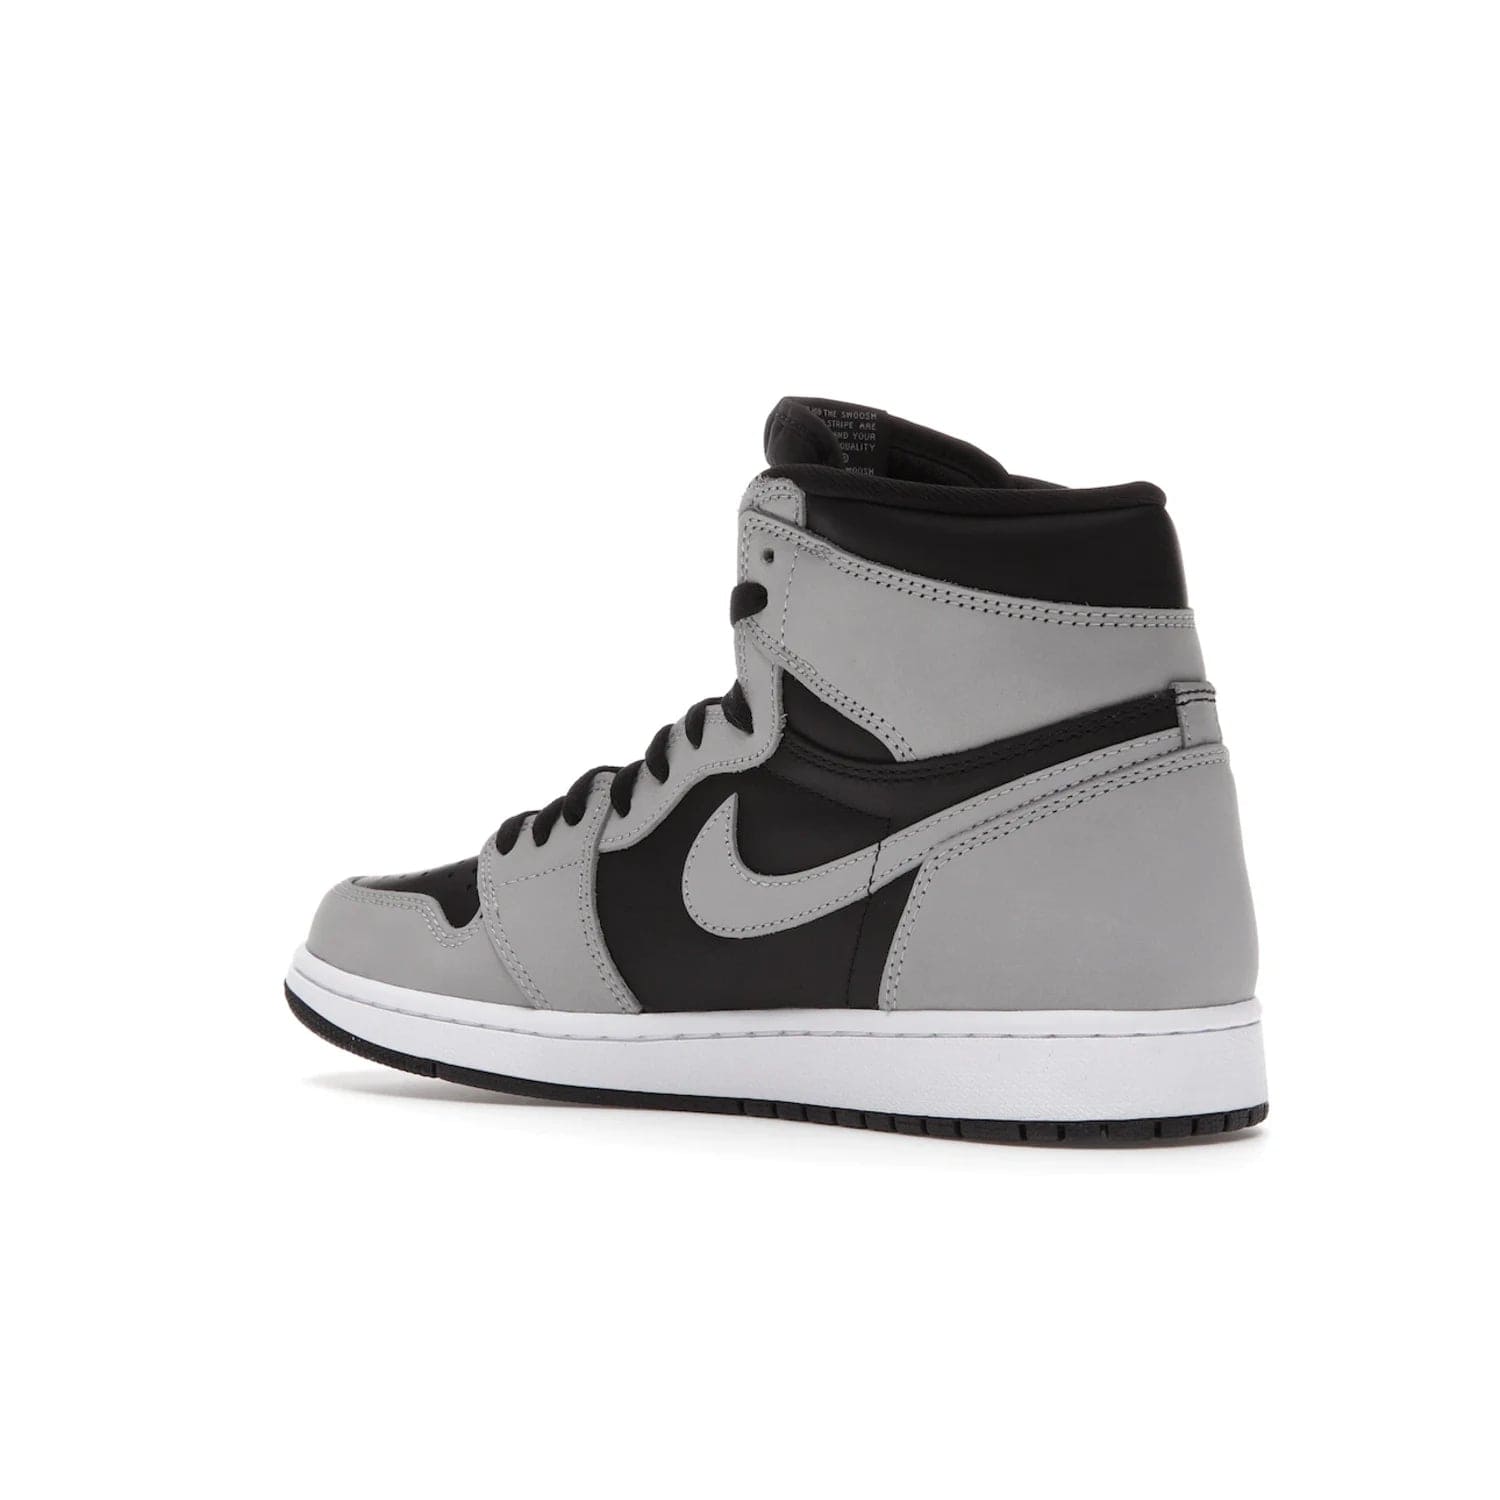 Jordan 1 Retro High Shadow 2.0 - Image 23 - Only at www.BallersClubKickz.com - #
Classic Air Jordan 1 Retro High Shadow 2.0 with black leather base and Light Smoke Grey overlays. Released in May 2021.